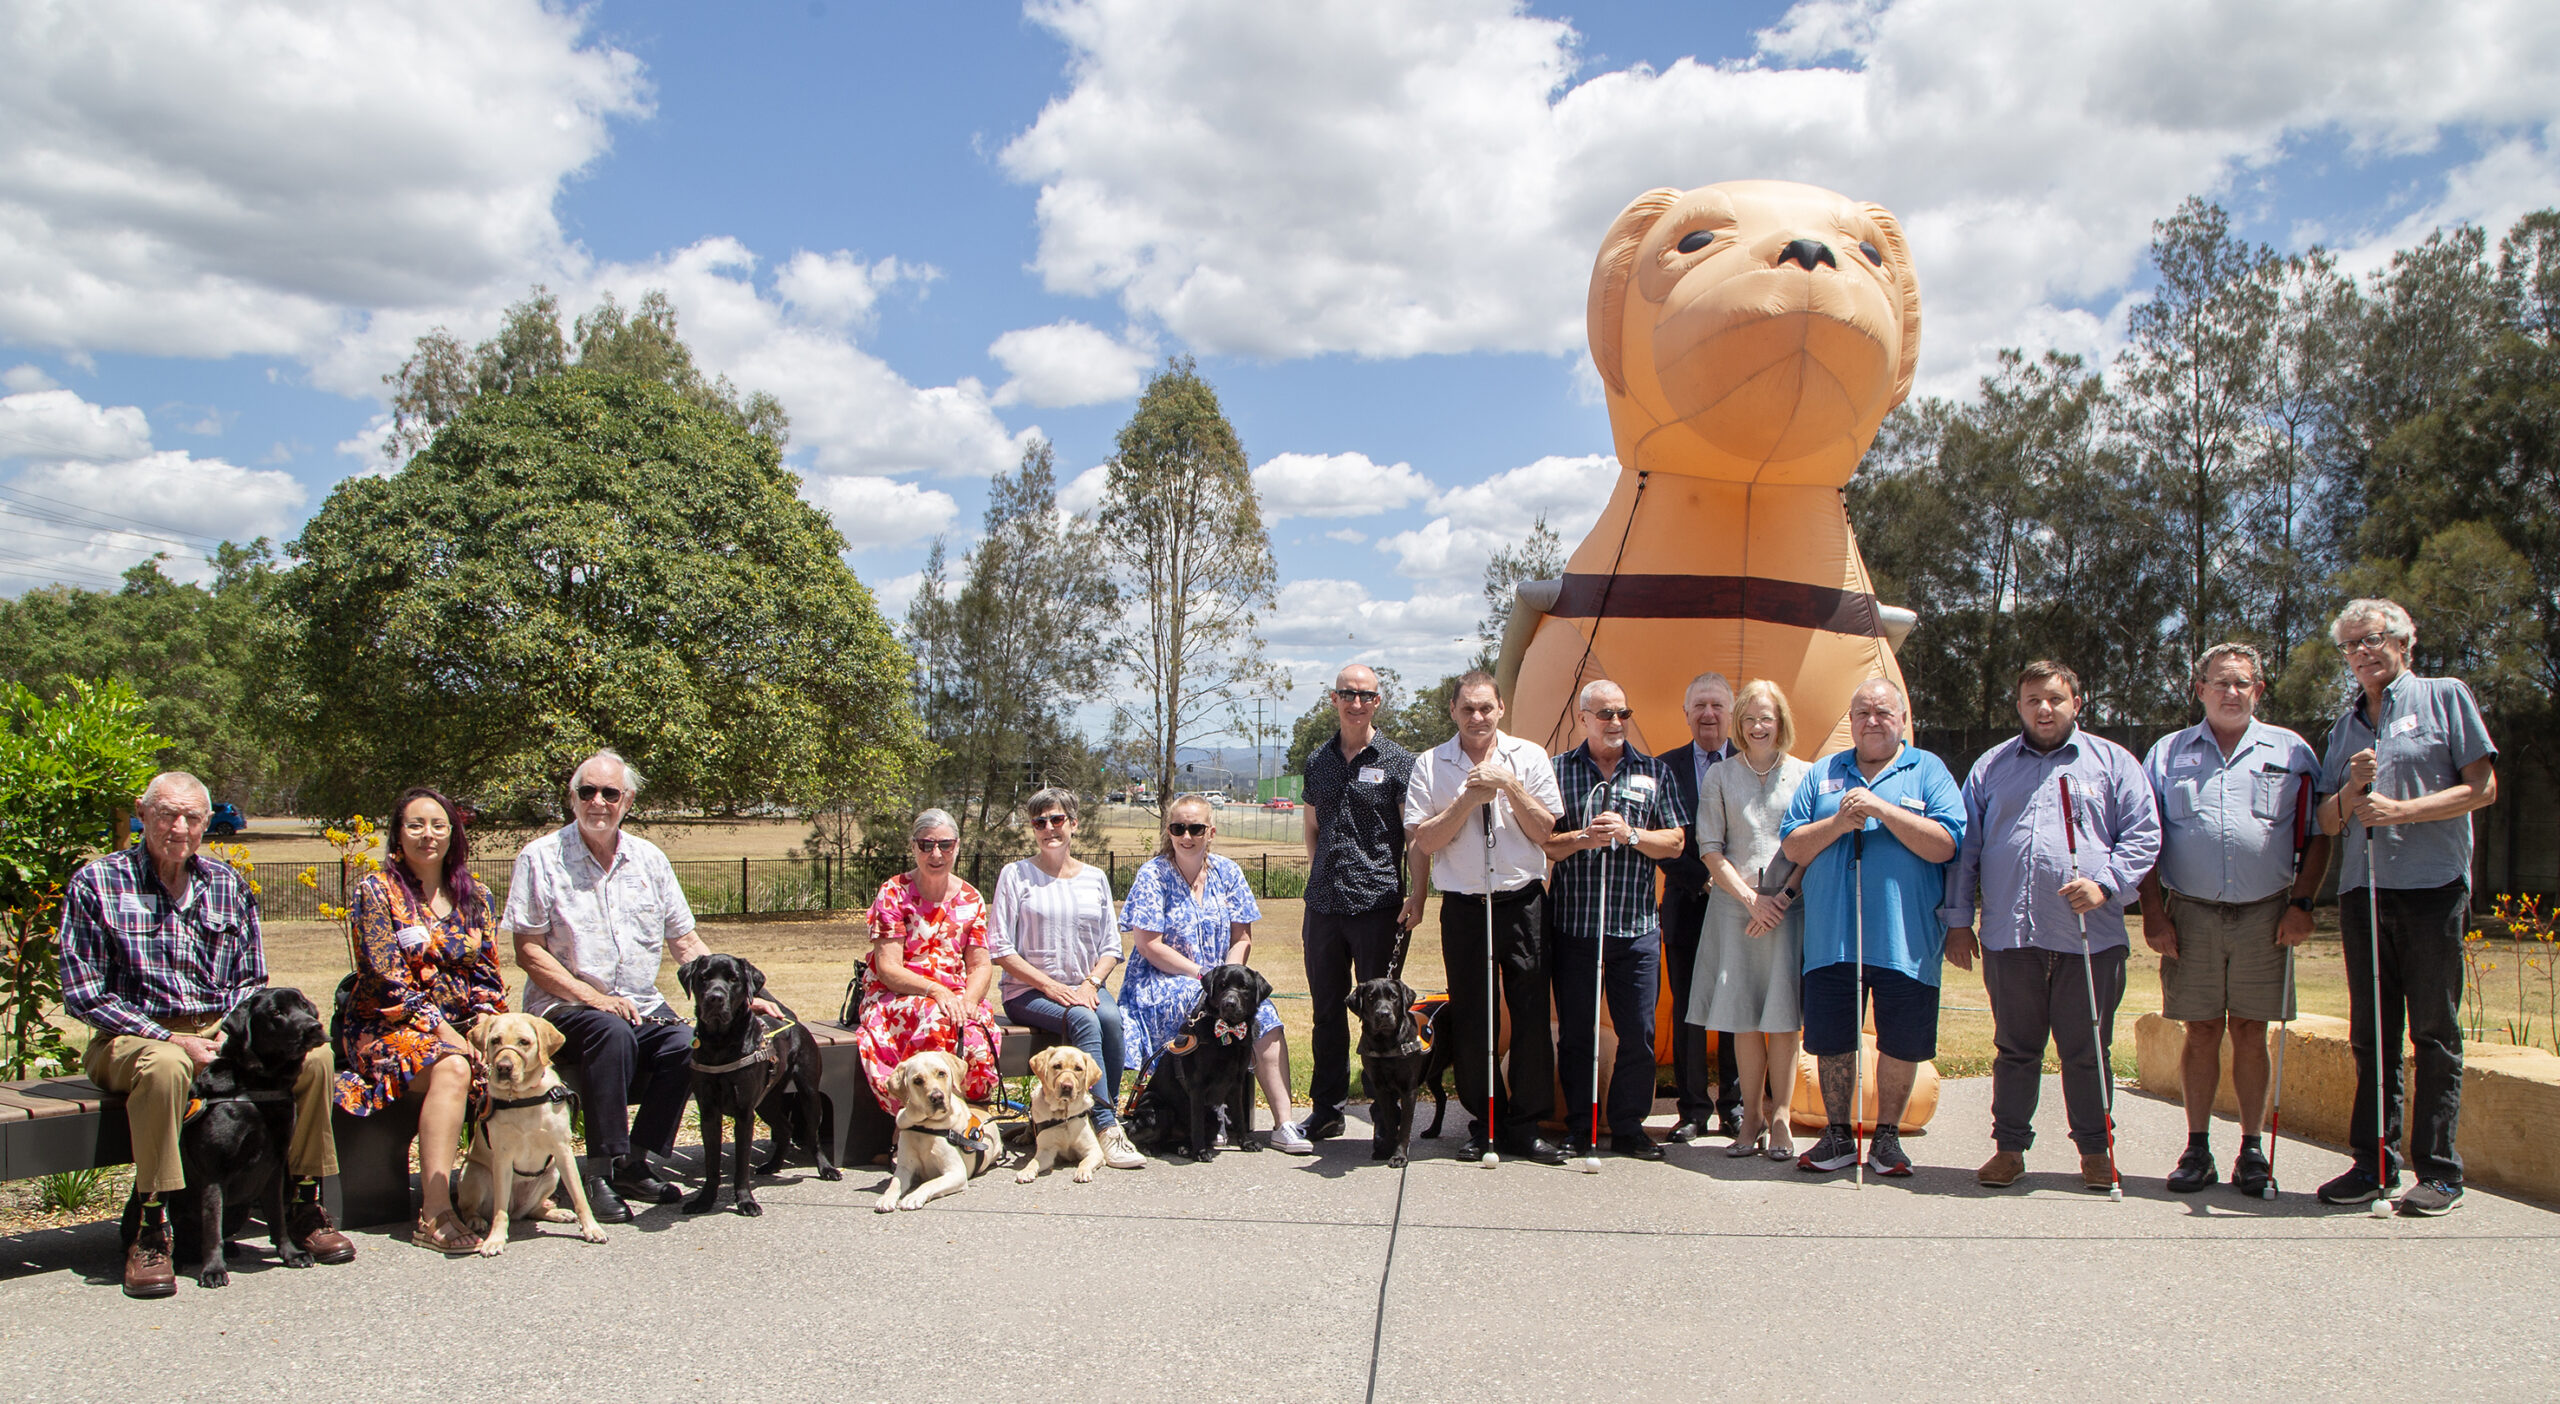 Group photo of attending Graduates with President of the Board Mr. Richard Anderson OAM and Her Excellency the Honourable Dr. Jeannette Young AC PSM, Governor of Queensland. Graduates are smiling at the camera and standing in front of inflatable Guide Dog Gulliver.